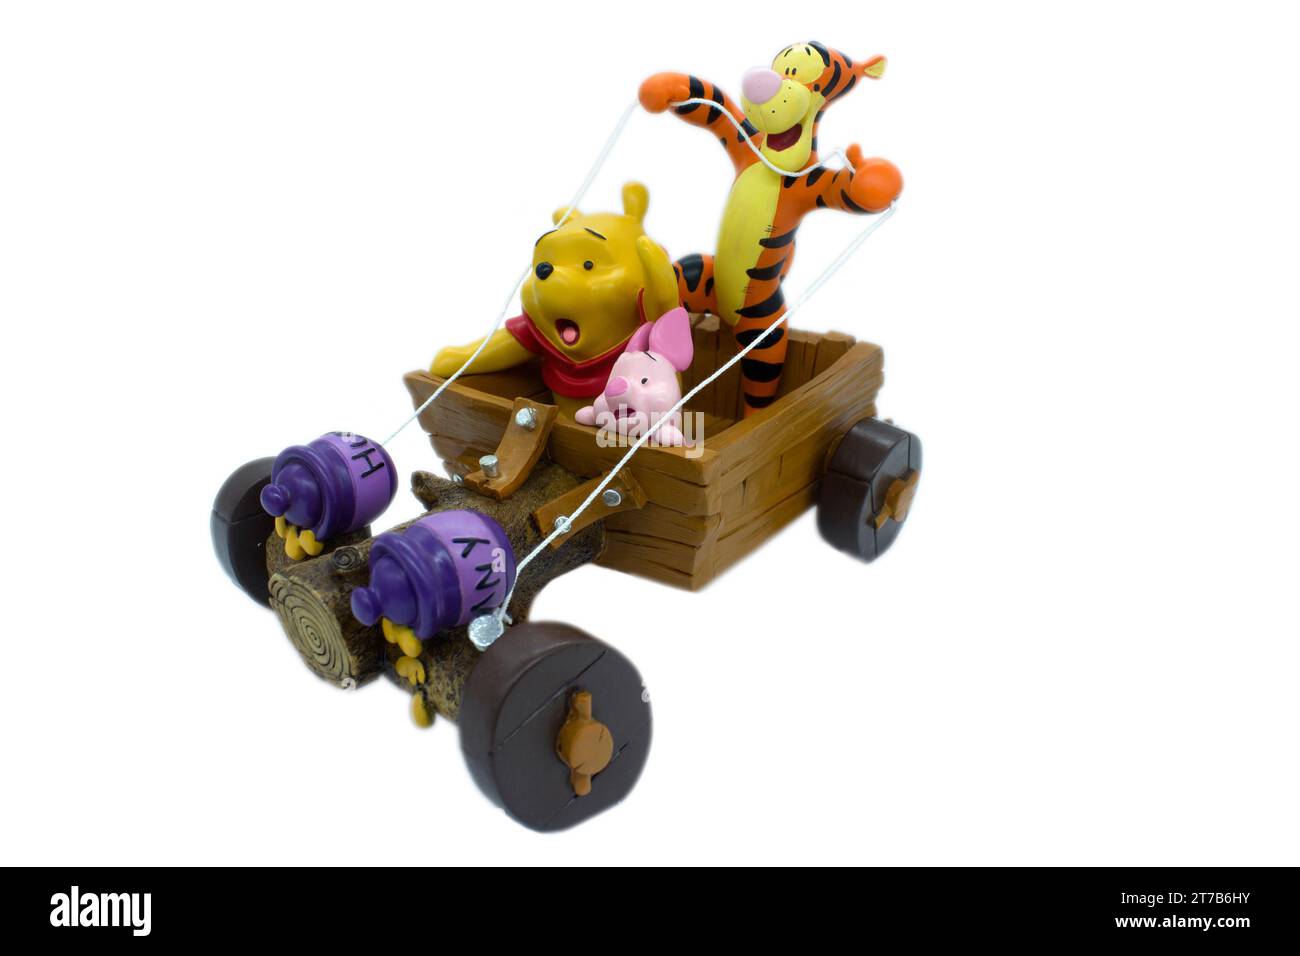 Disney image of winnie the pooh and friends Stock Photo